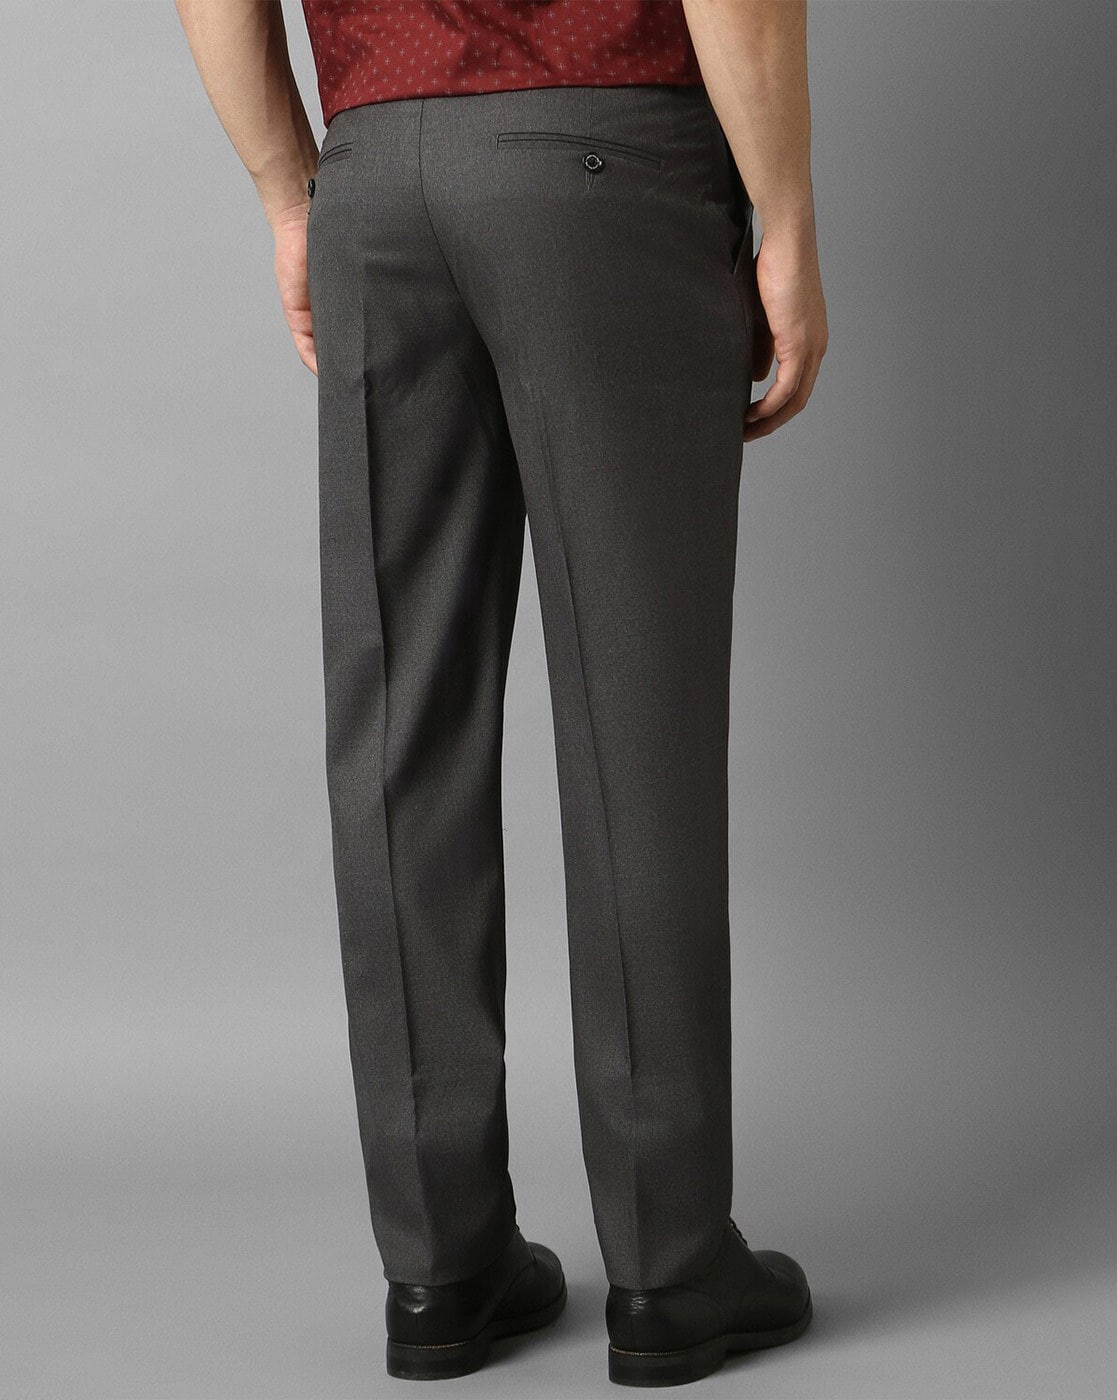 Mens Regular Fit Formal Trousers | Plain Front Formal Trousers | Next  Official Site